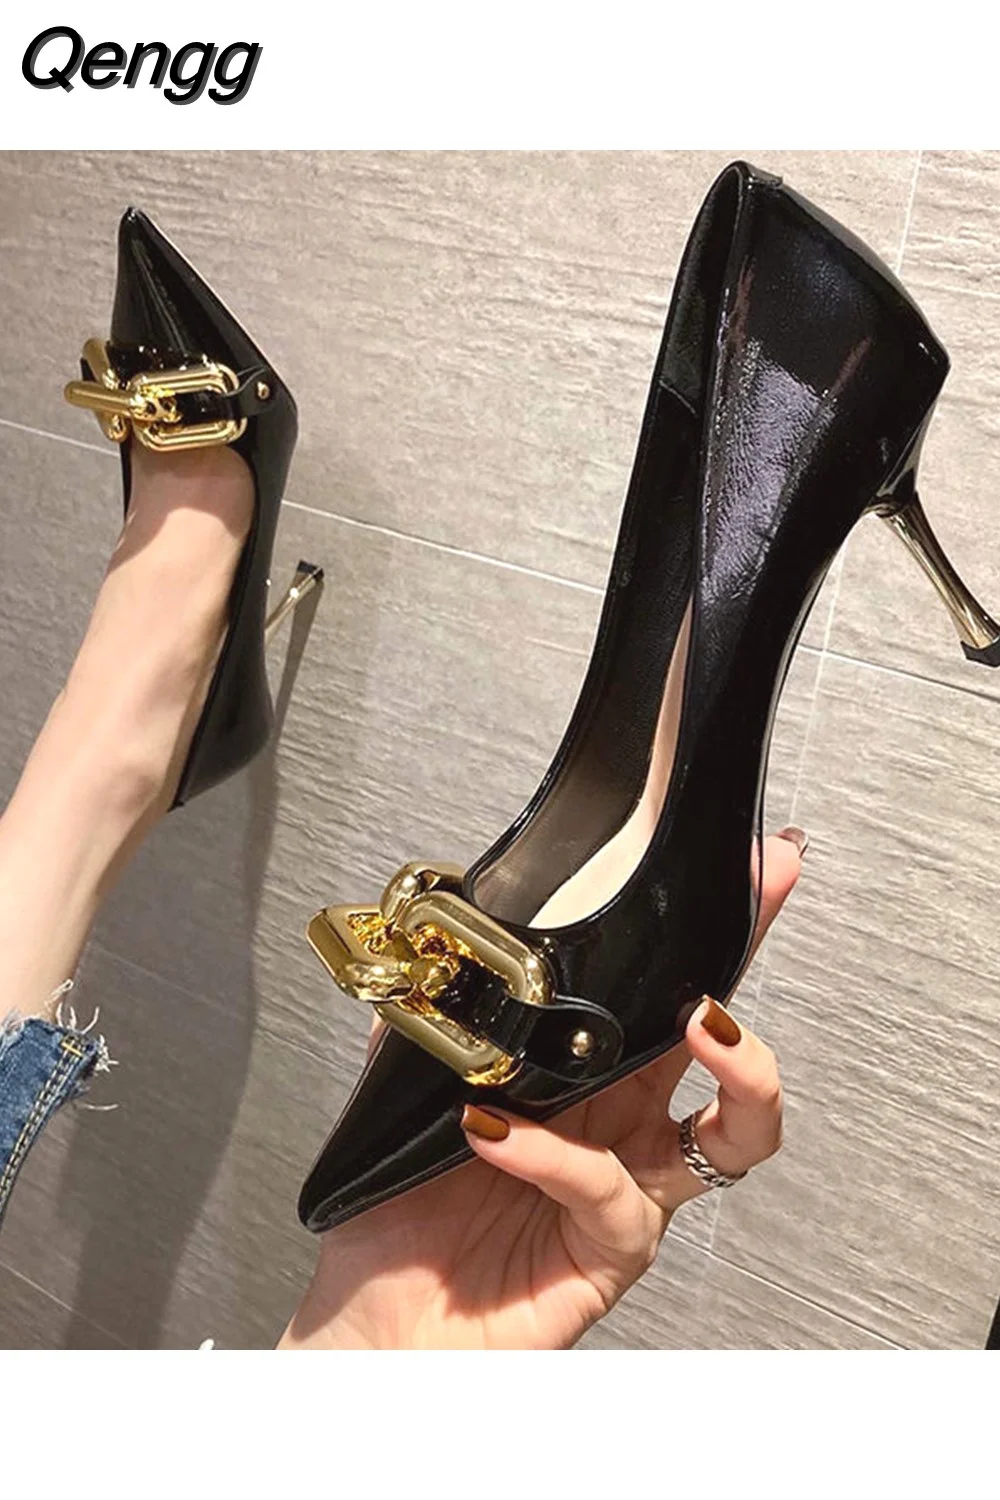 Qengg Heeled Shoes 2023 Pointed Toe Stiletto Shoes Women Green Pumps Patent Leather High Heels with Metal Chain Ladies Office